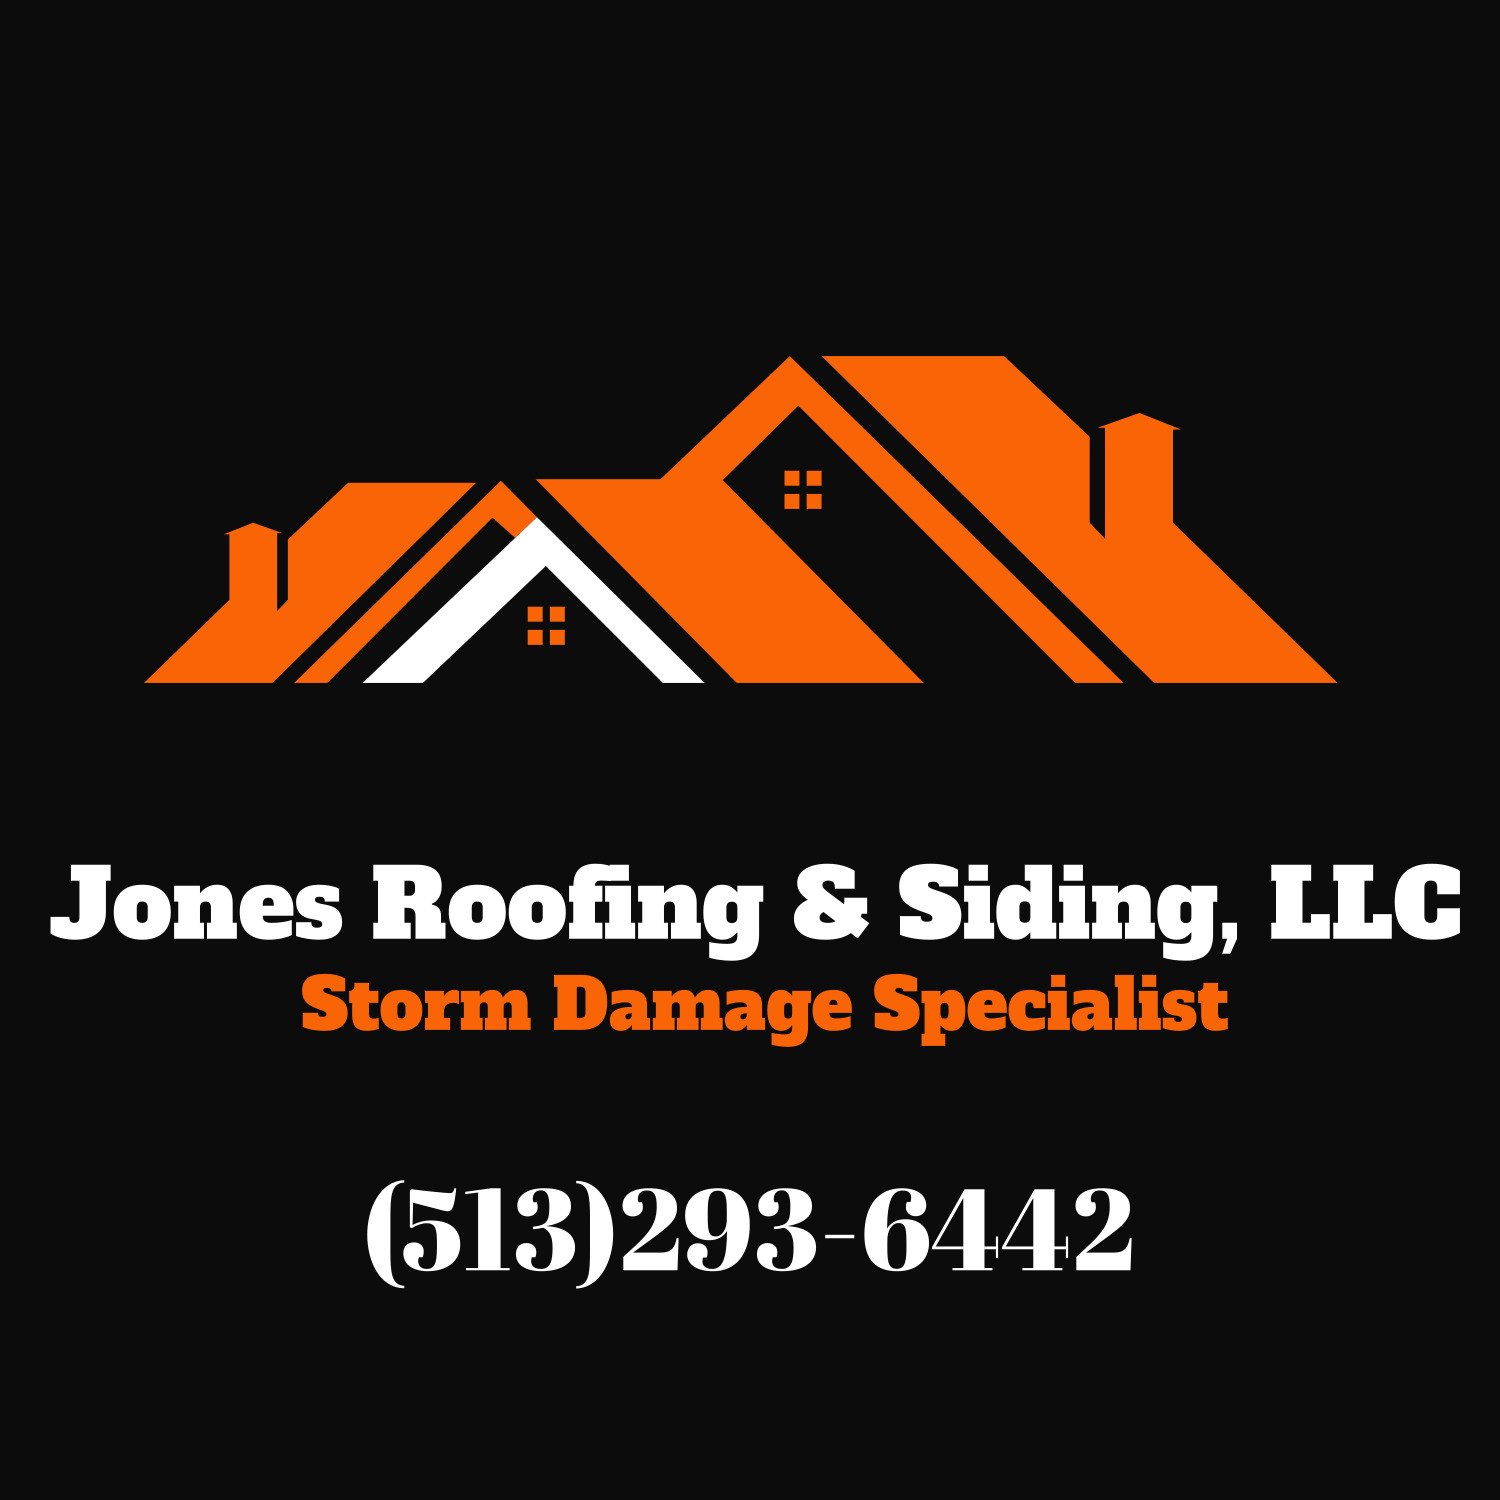 Our mission as a roofing contractor company is to develop a highly successful, profitable all round roofing contractor business which provides quality services.